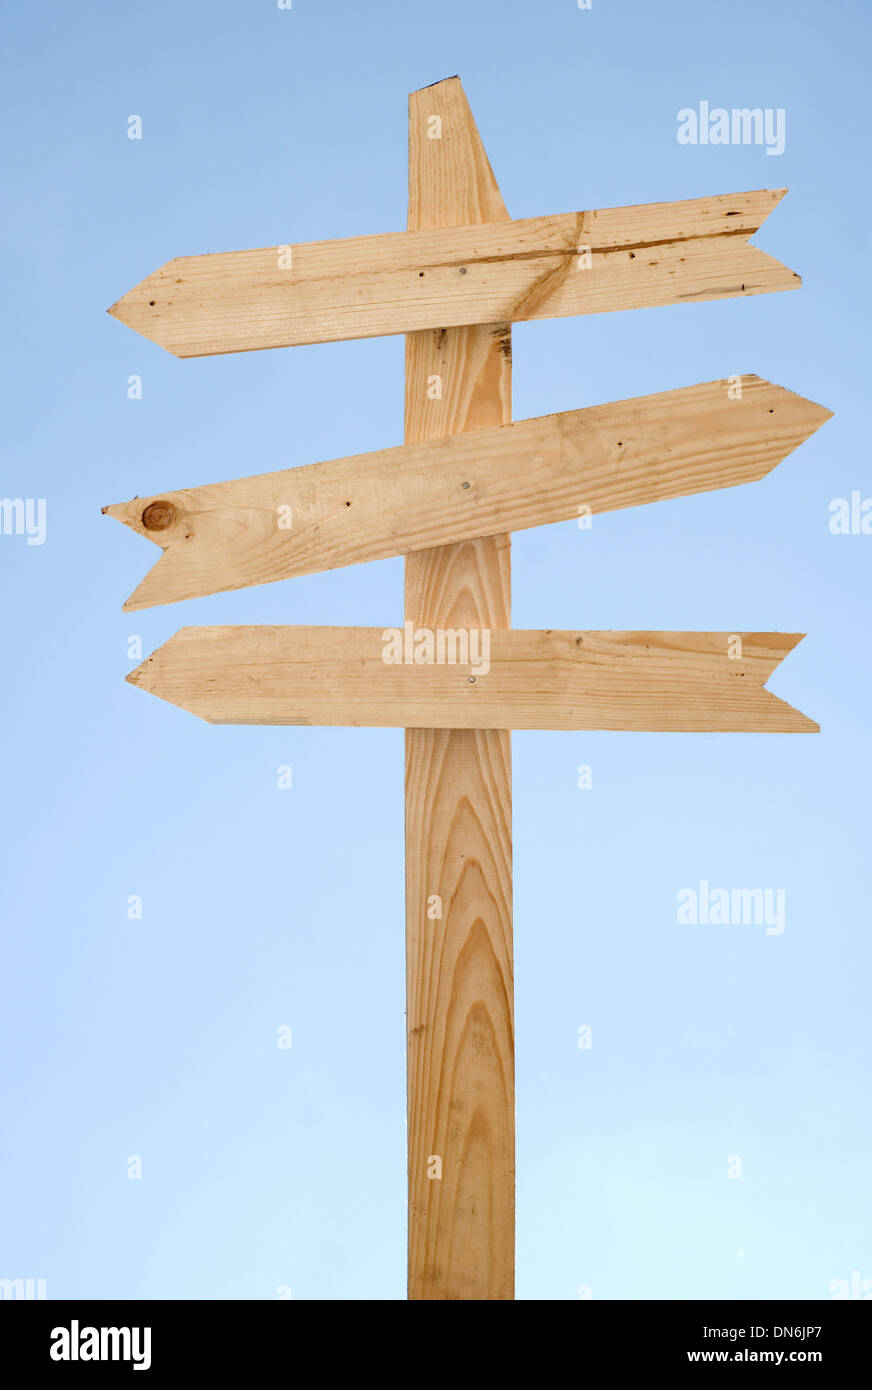 Blank wooden direction signpost against a blue sky Stock Photo